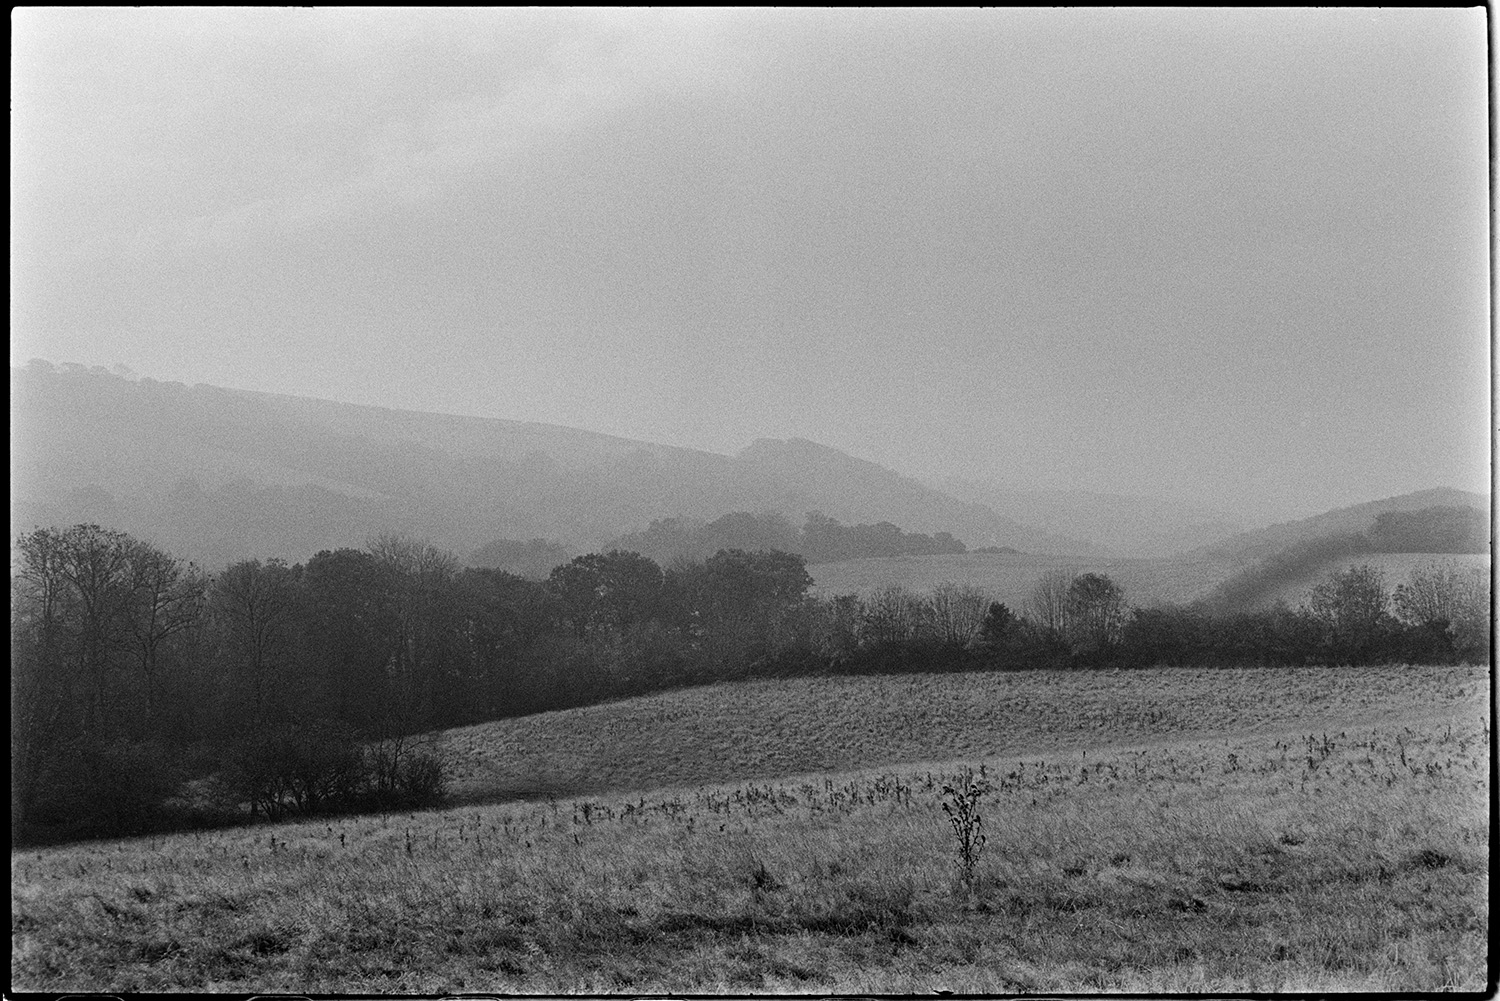 Misty, but very boring views details of old hedge. 
[A misty view of a field, trees and hills near Chulmleigh.]